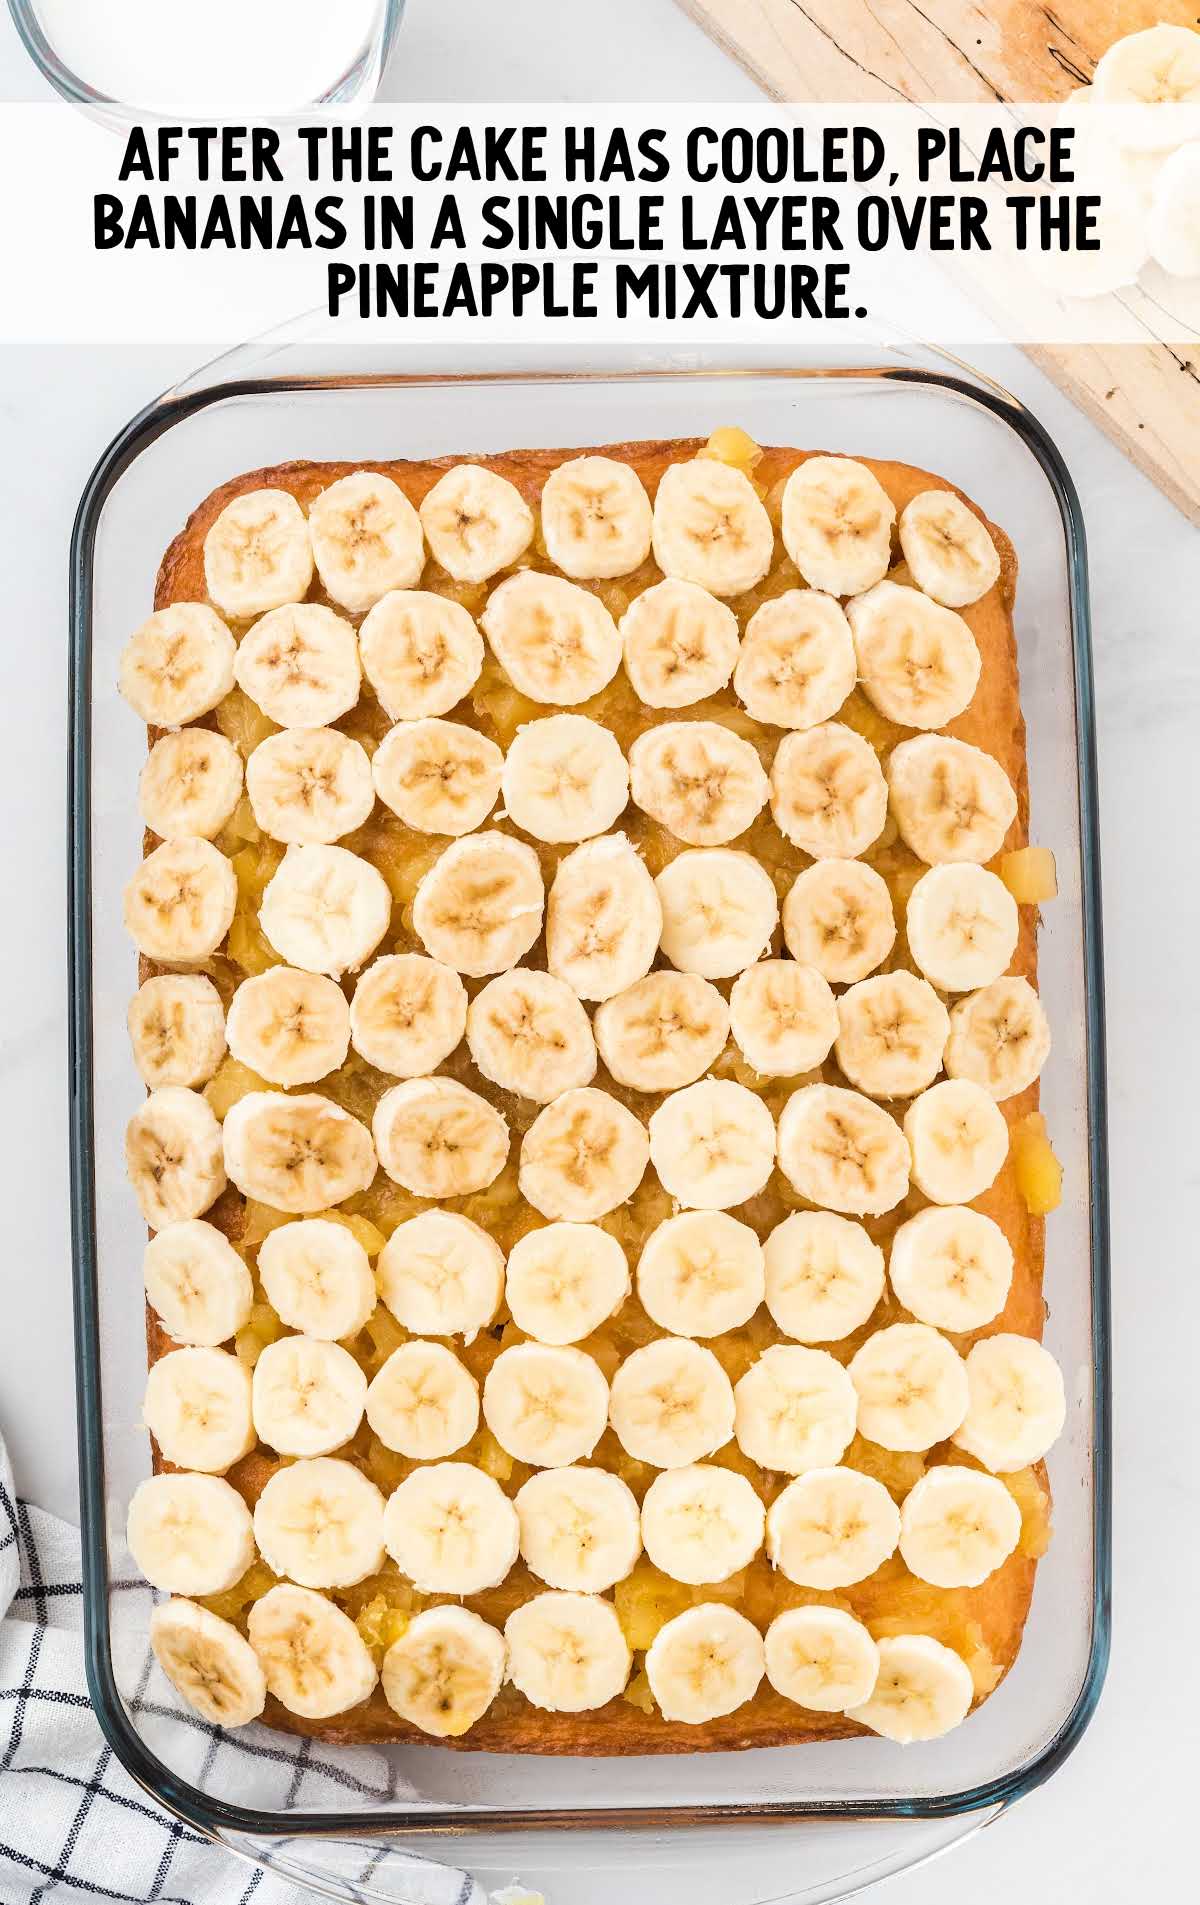 banana slices placed over cake